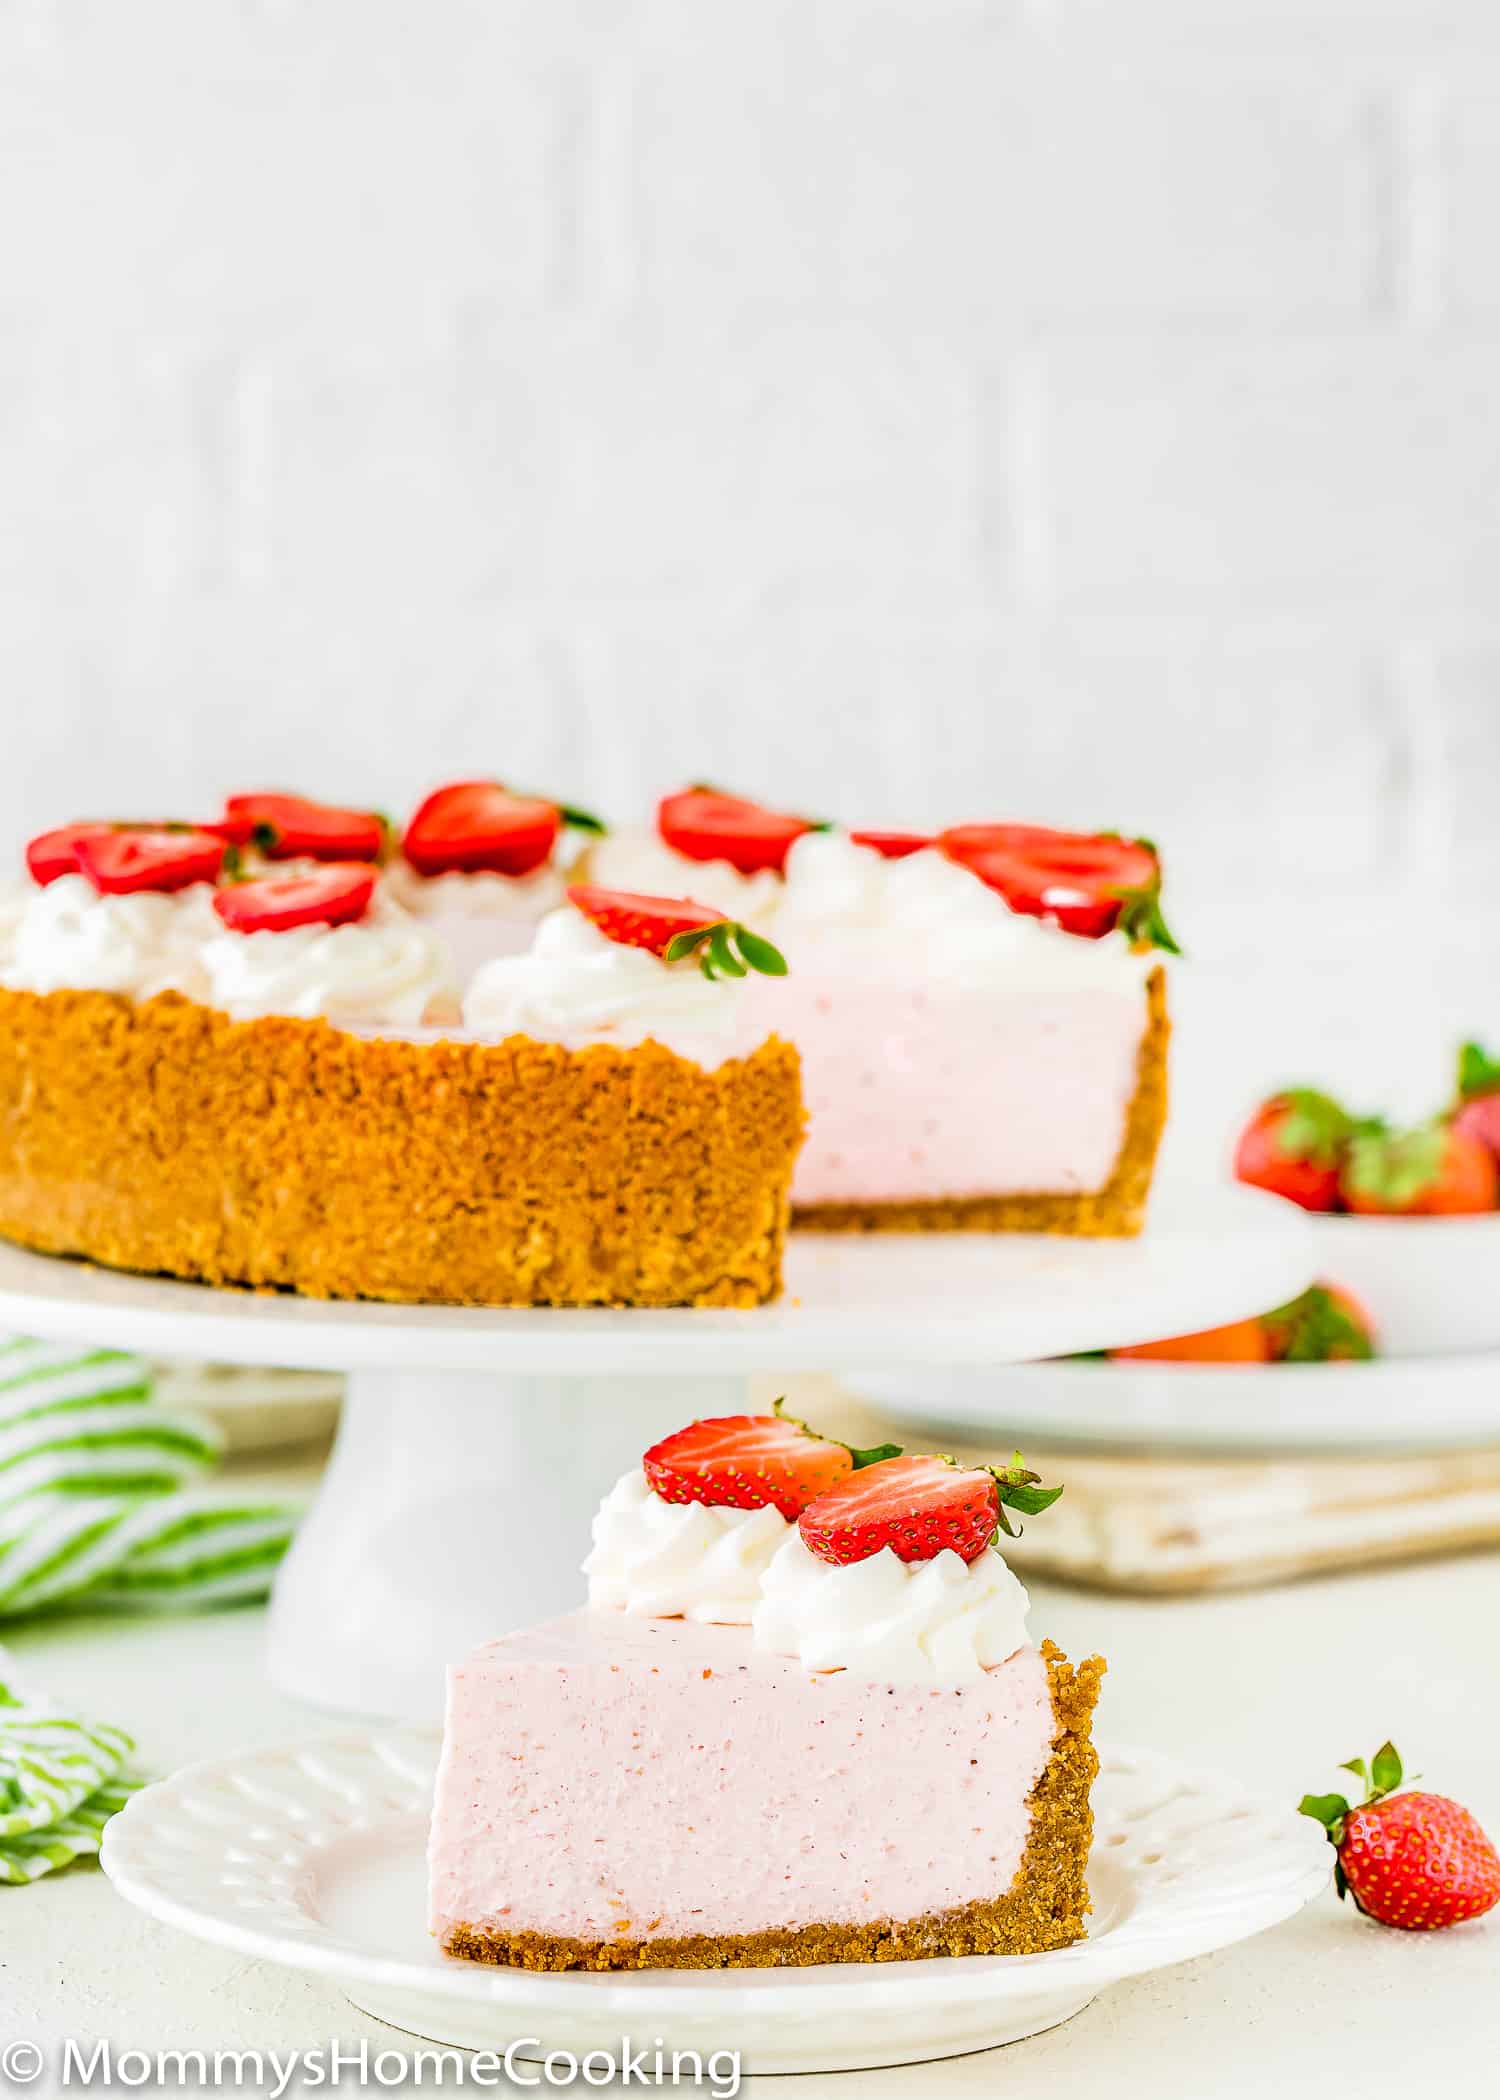 a slice of No-Bake Strawberry Cheesecake on a plate and the whole cake on the background.